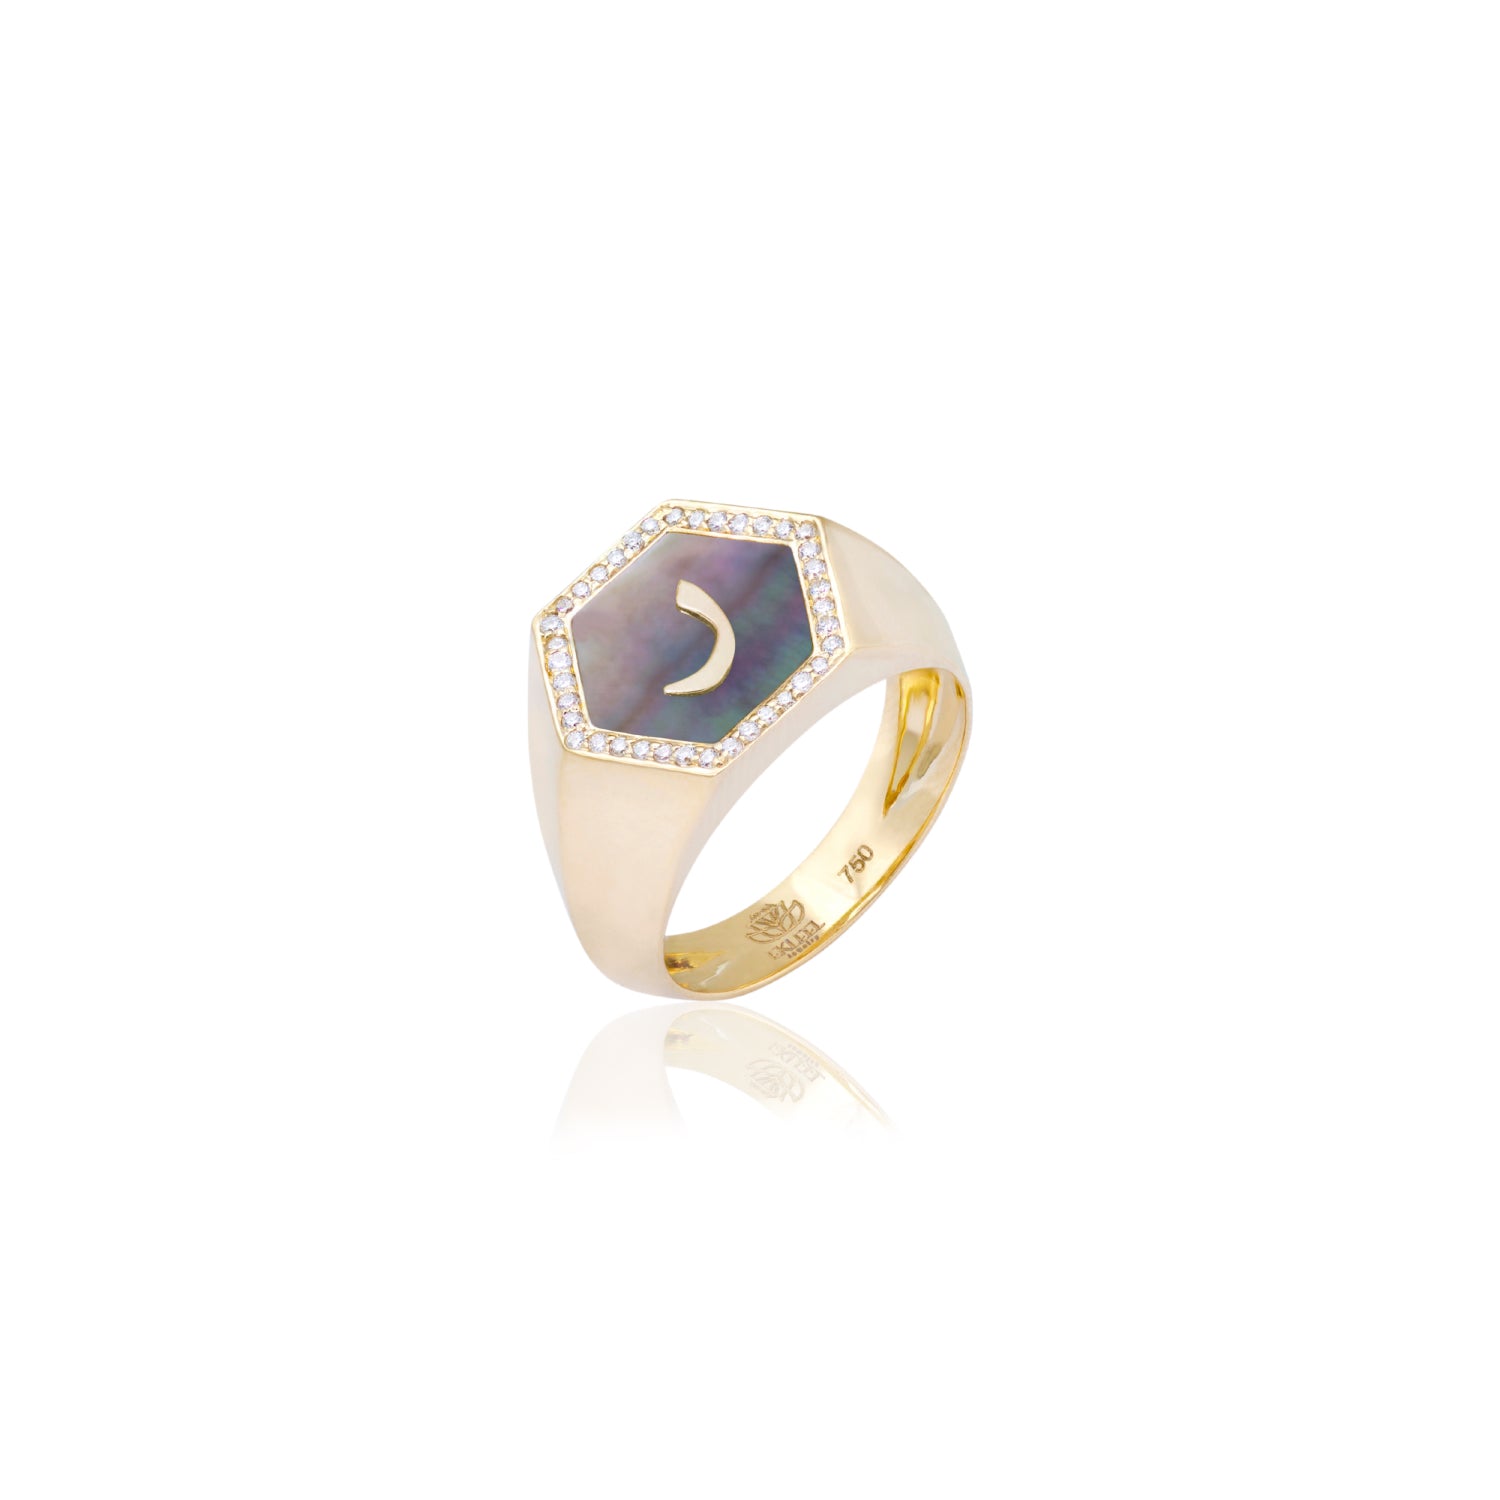 Qamoos 2.0 Letter ر Black Mother of Pearl and Diamond Signet Ring in Yellow Gold